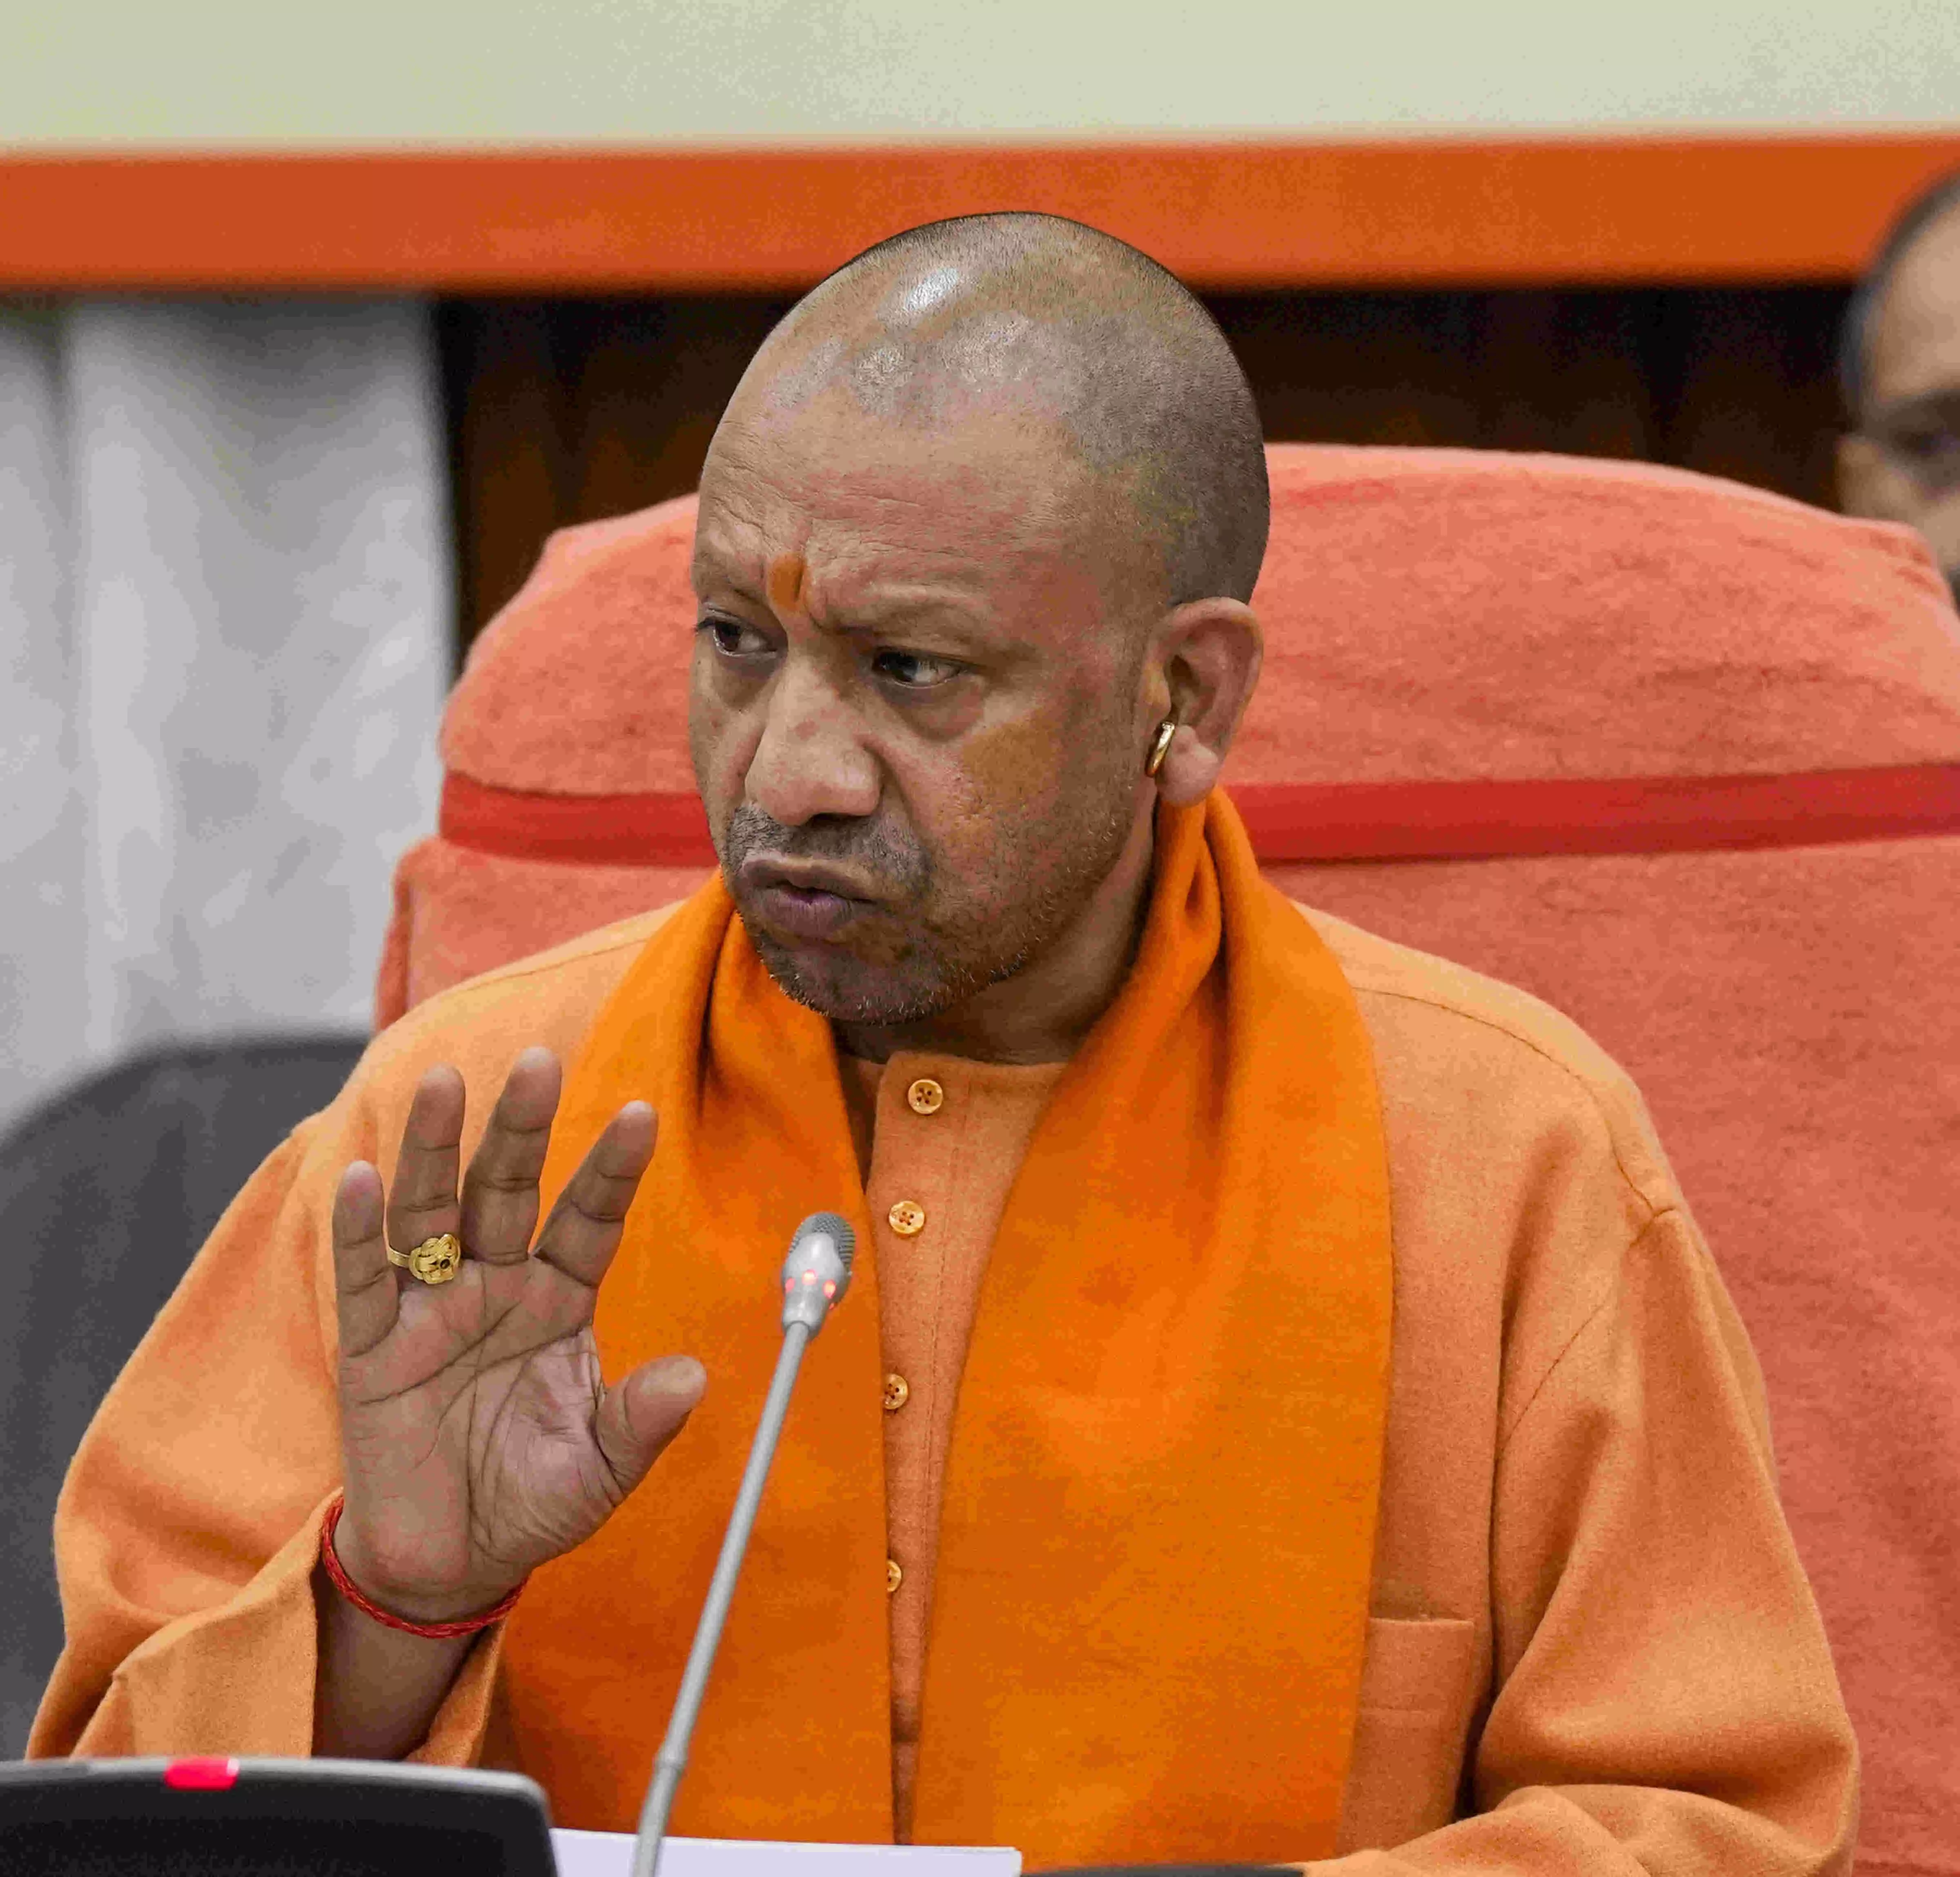 Previous governments in UP made Azamgarh hub of crime and mafia activities: CM Adityanath